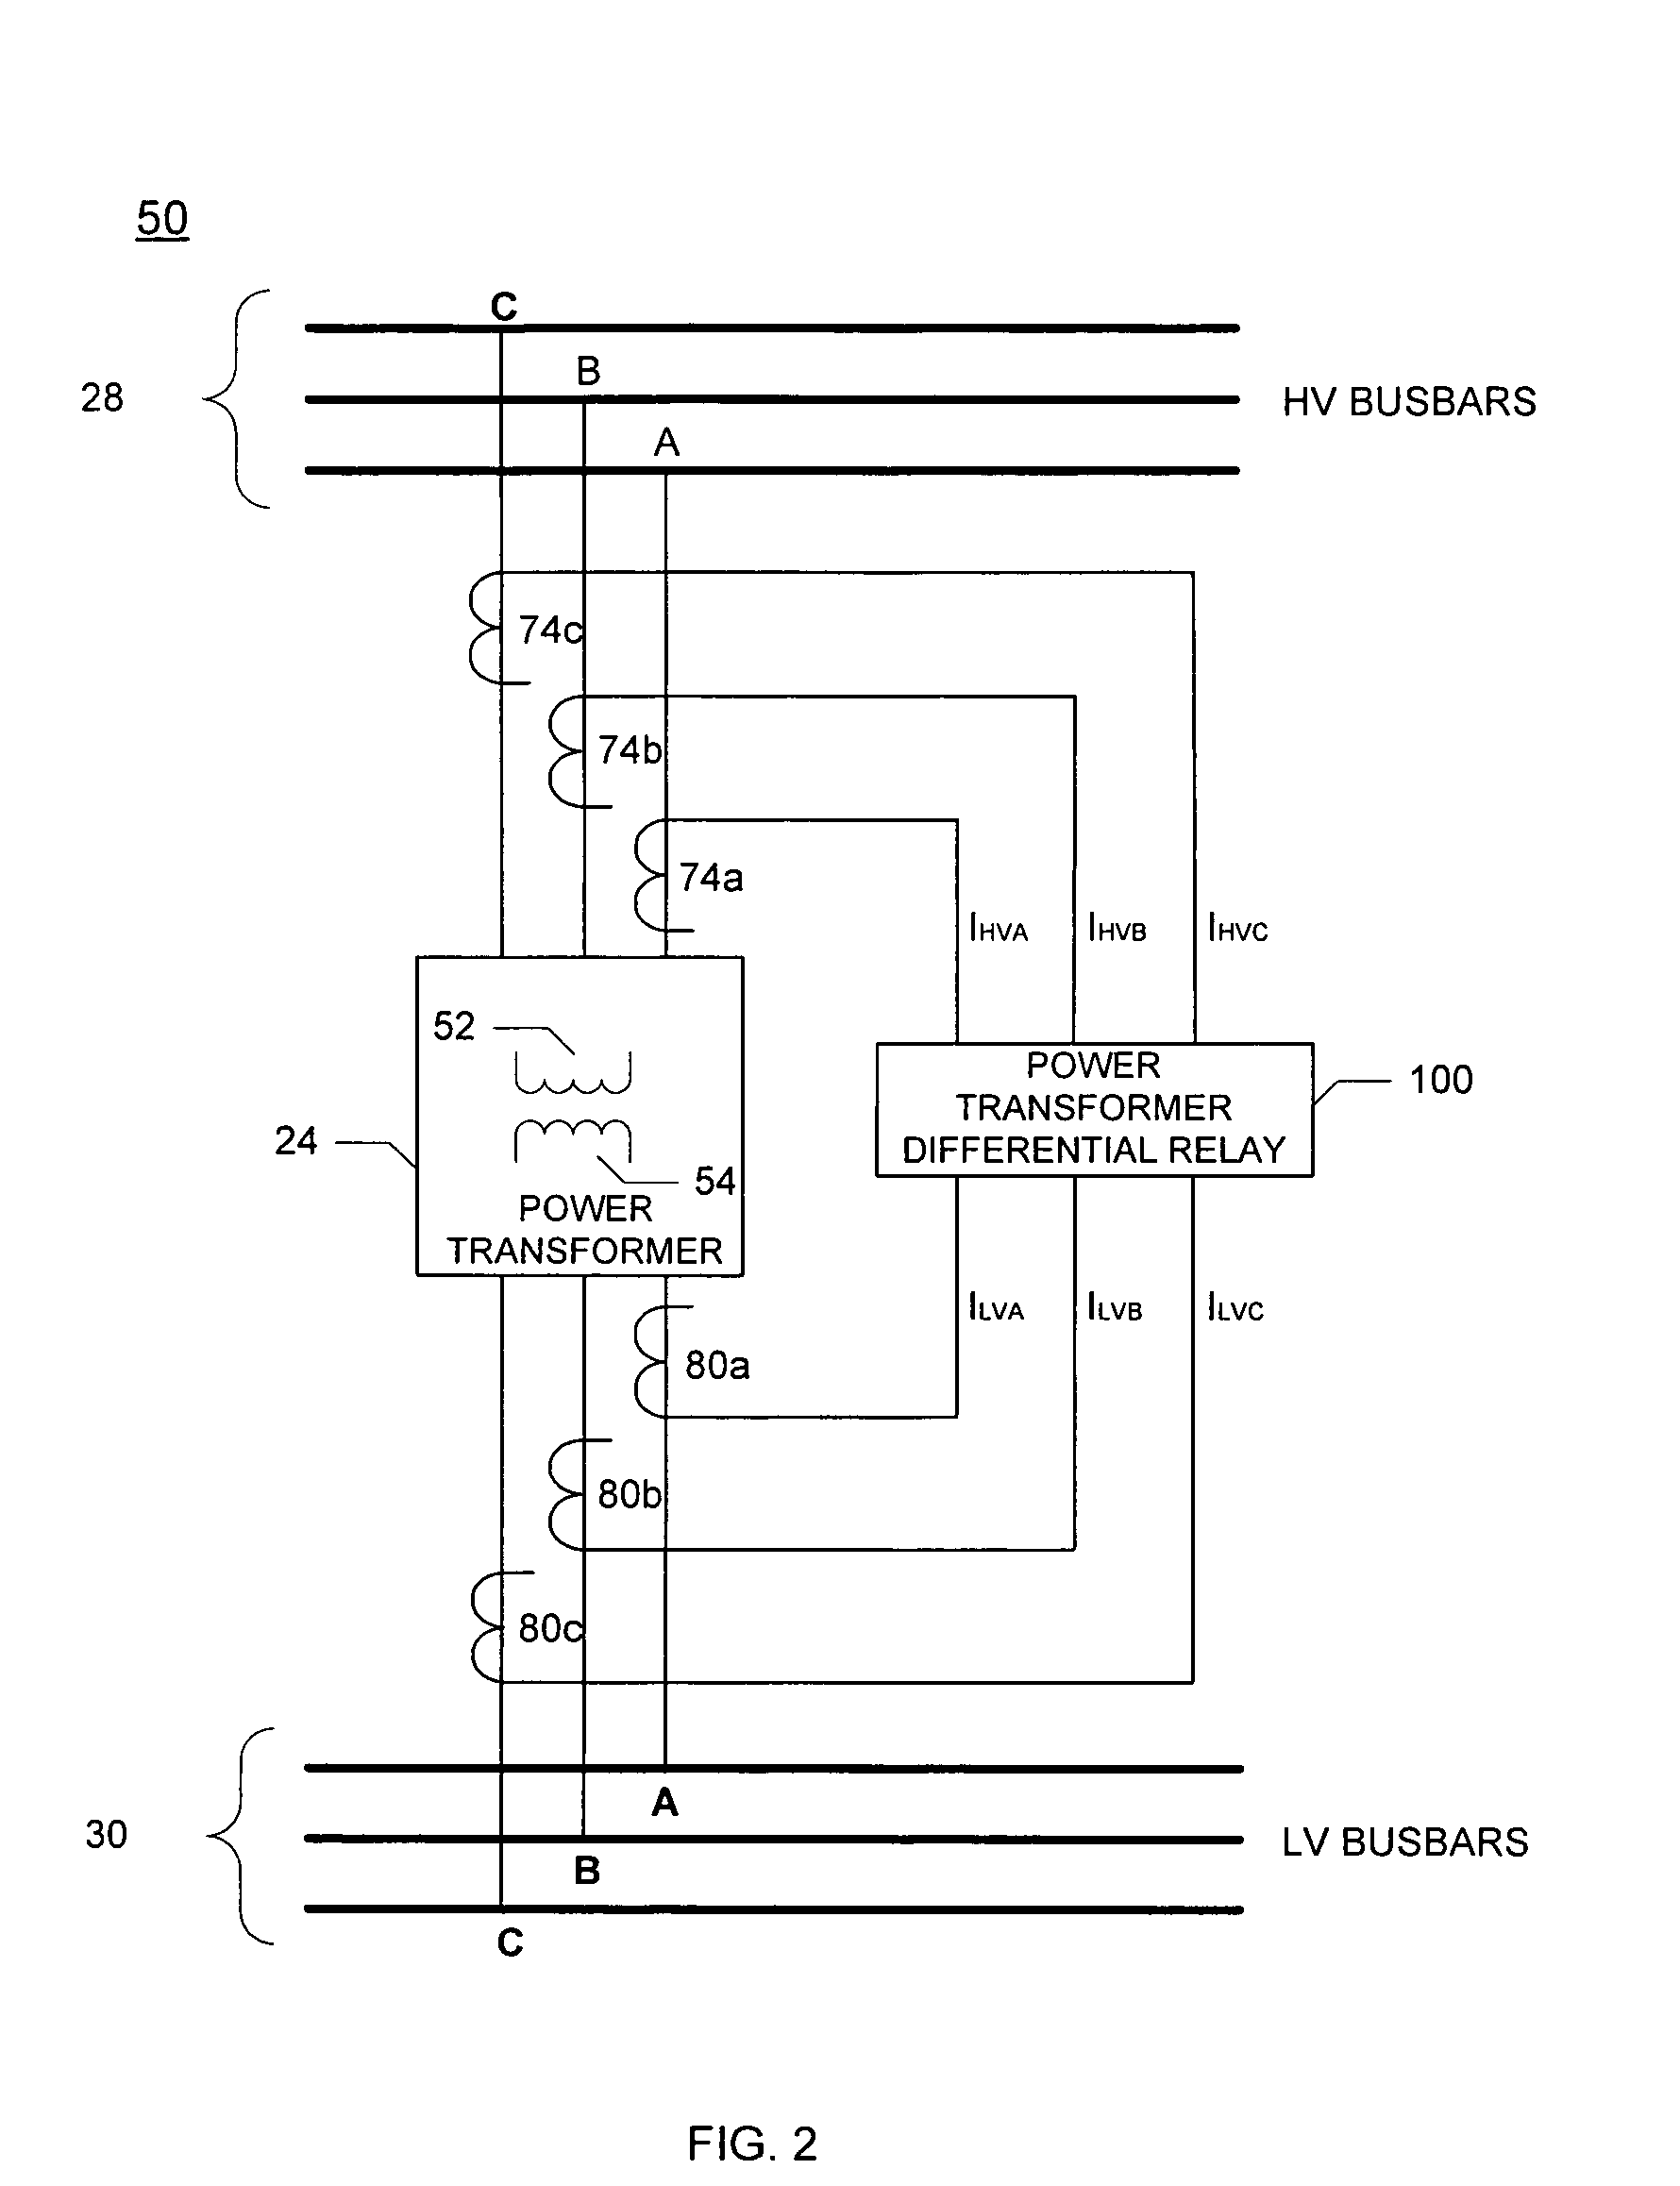 Apparatus and method for compensating secondary currents used in differential protection to correct for a phase shift introduced between high voltage and low voltage transformer windings